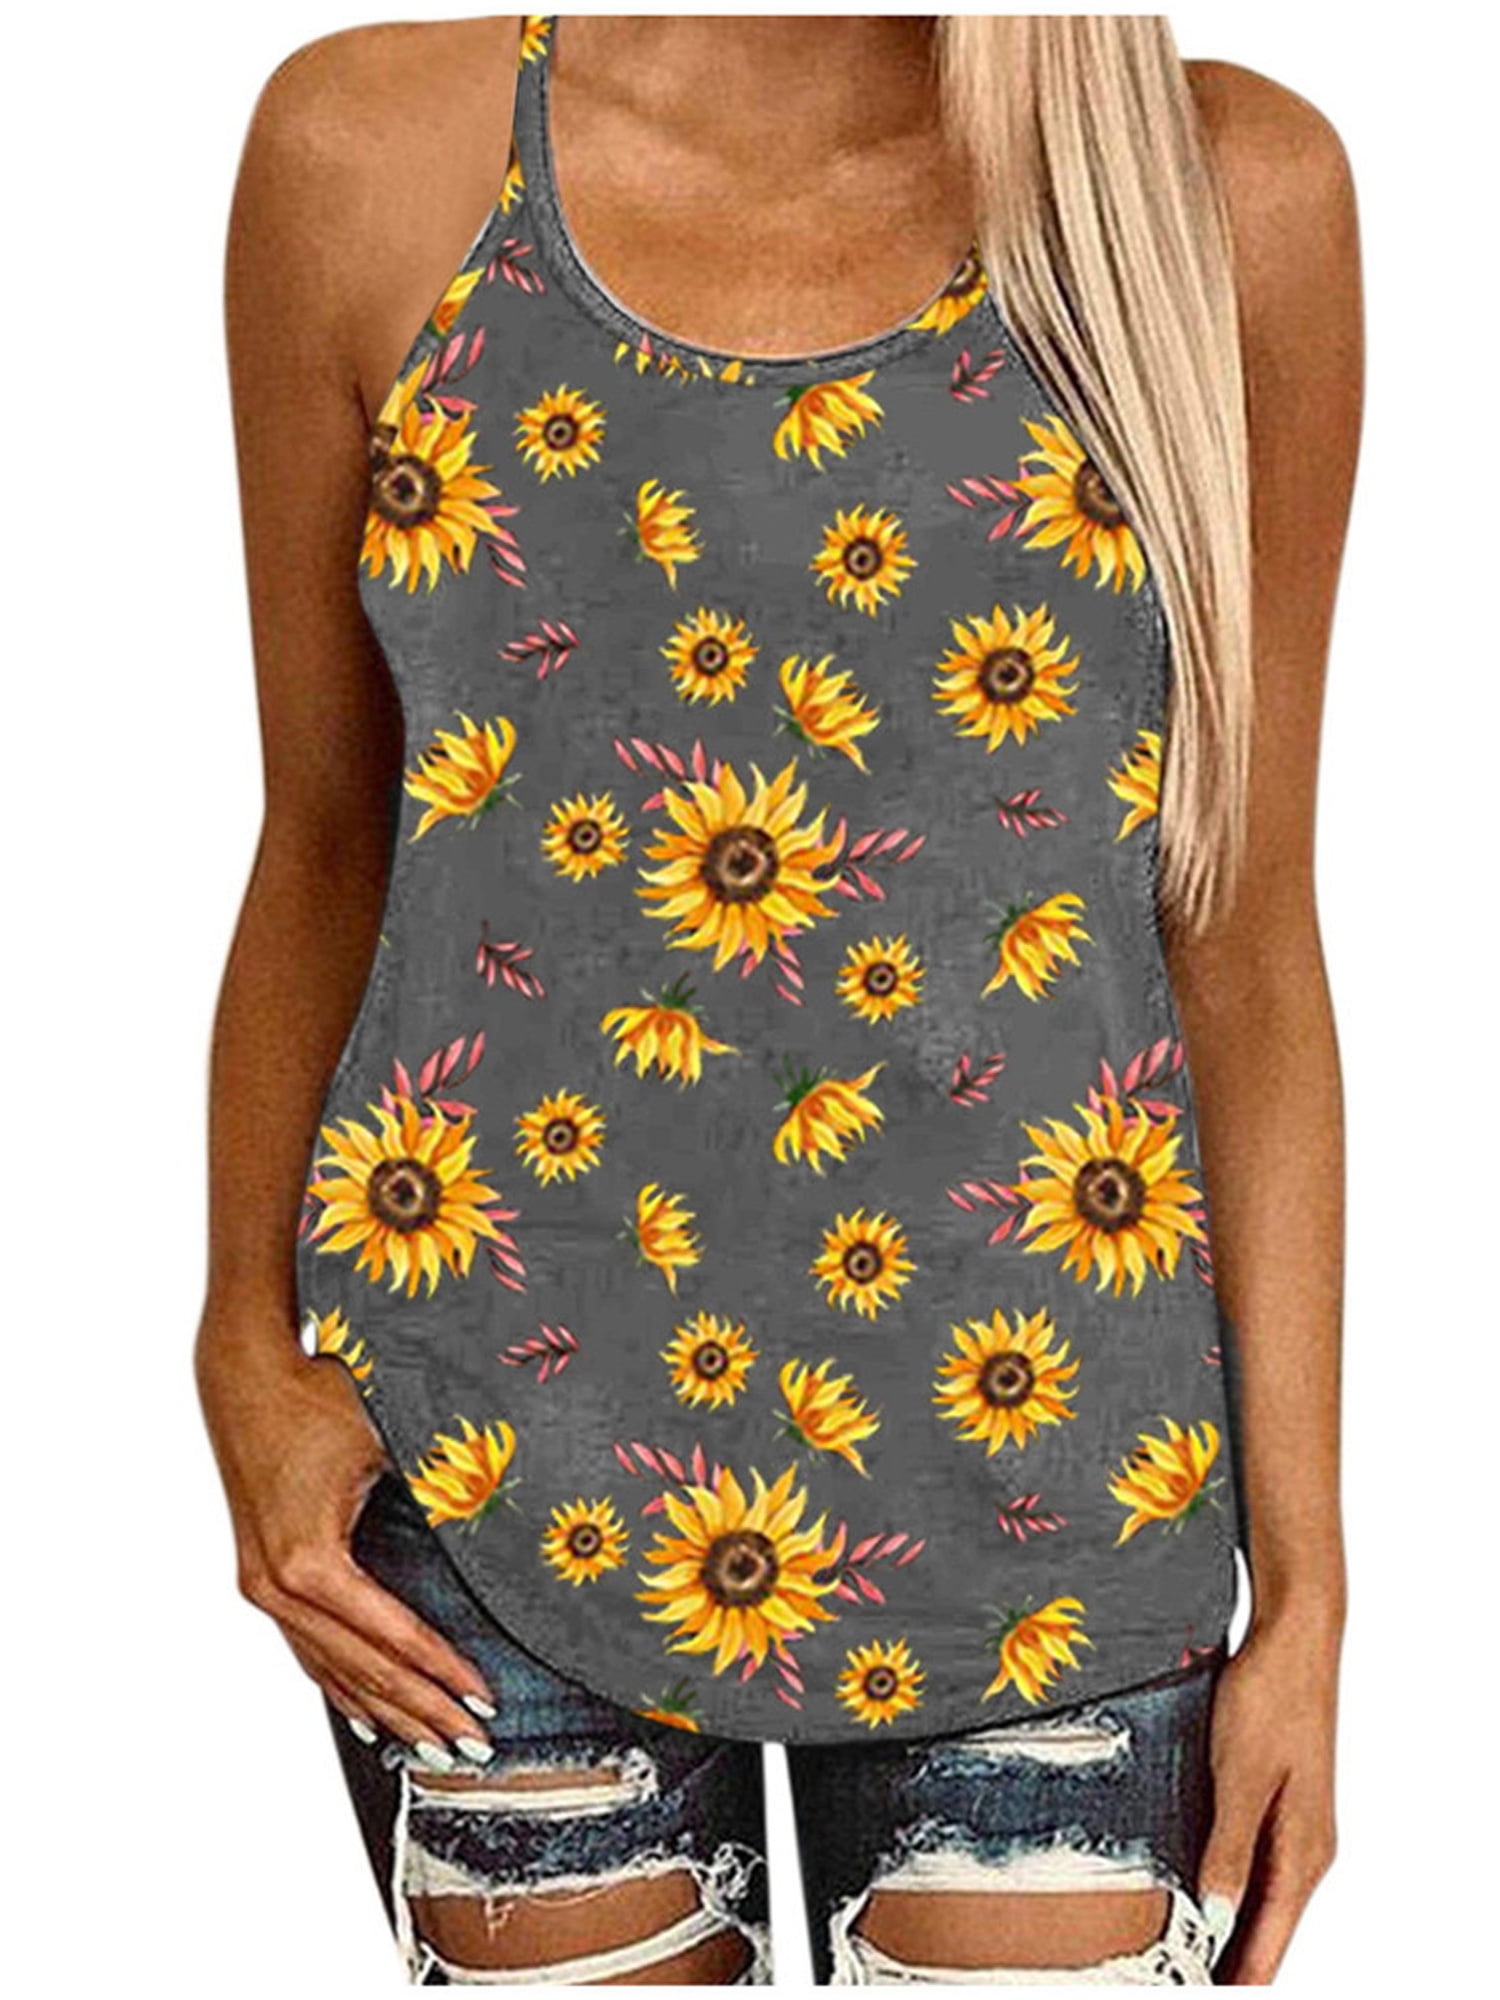 Sunflower Tank Tops for Women Summer Criss Cross Casual Backless Spaghetti Strap Shirts Strappy Sleeveless T-Shirt